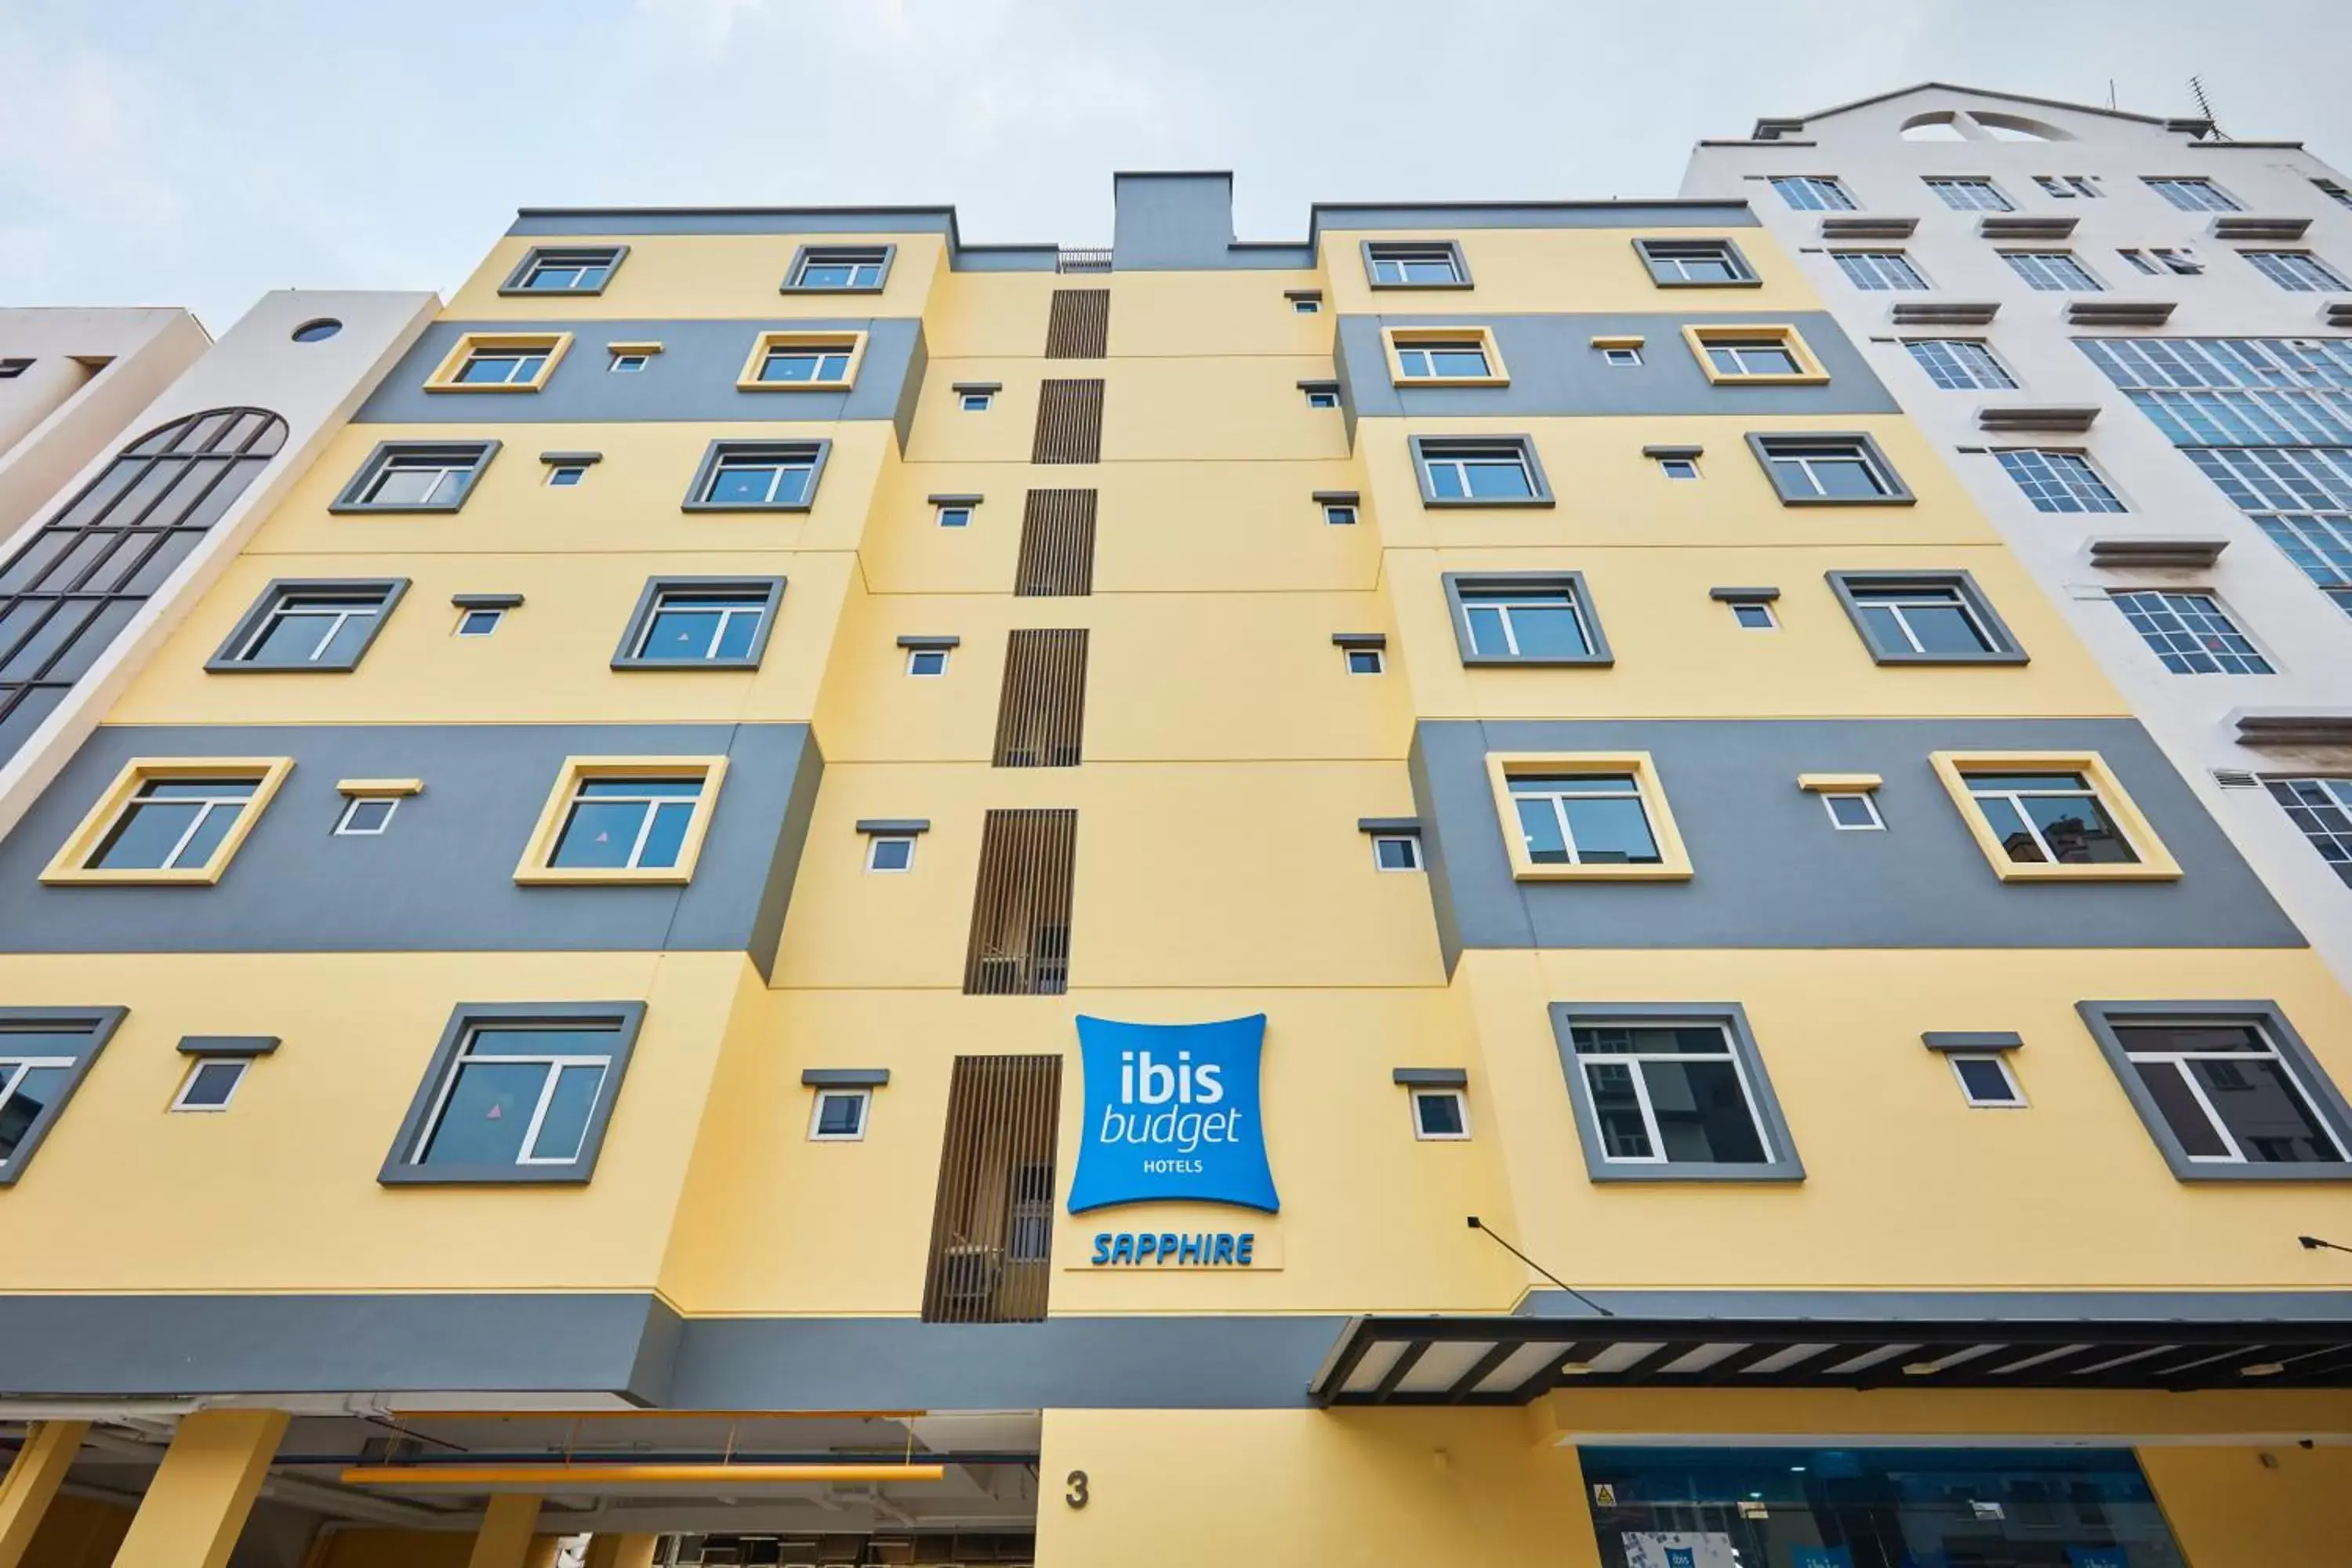 Facade/entrance, Property Building in ibis budget Singapore Sapphire